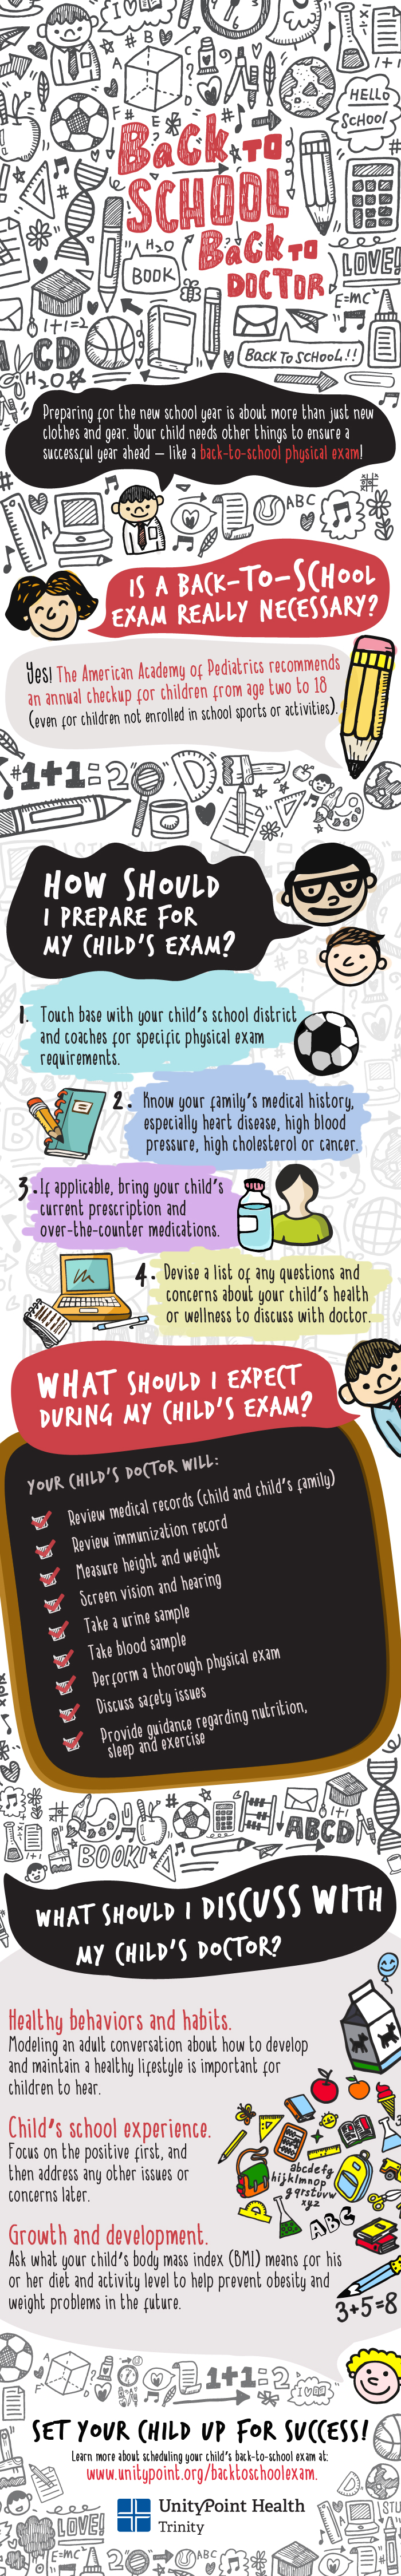 Back to school infographic